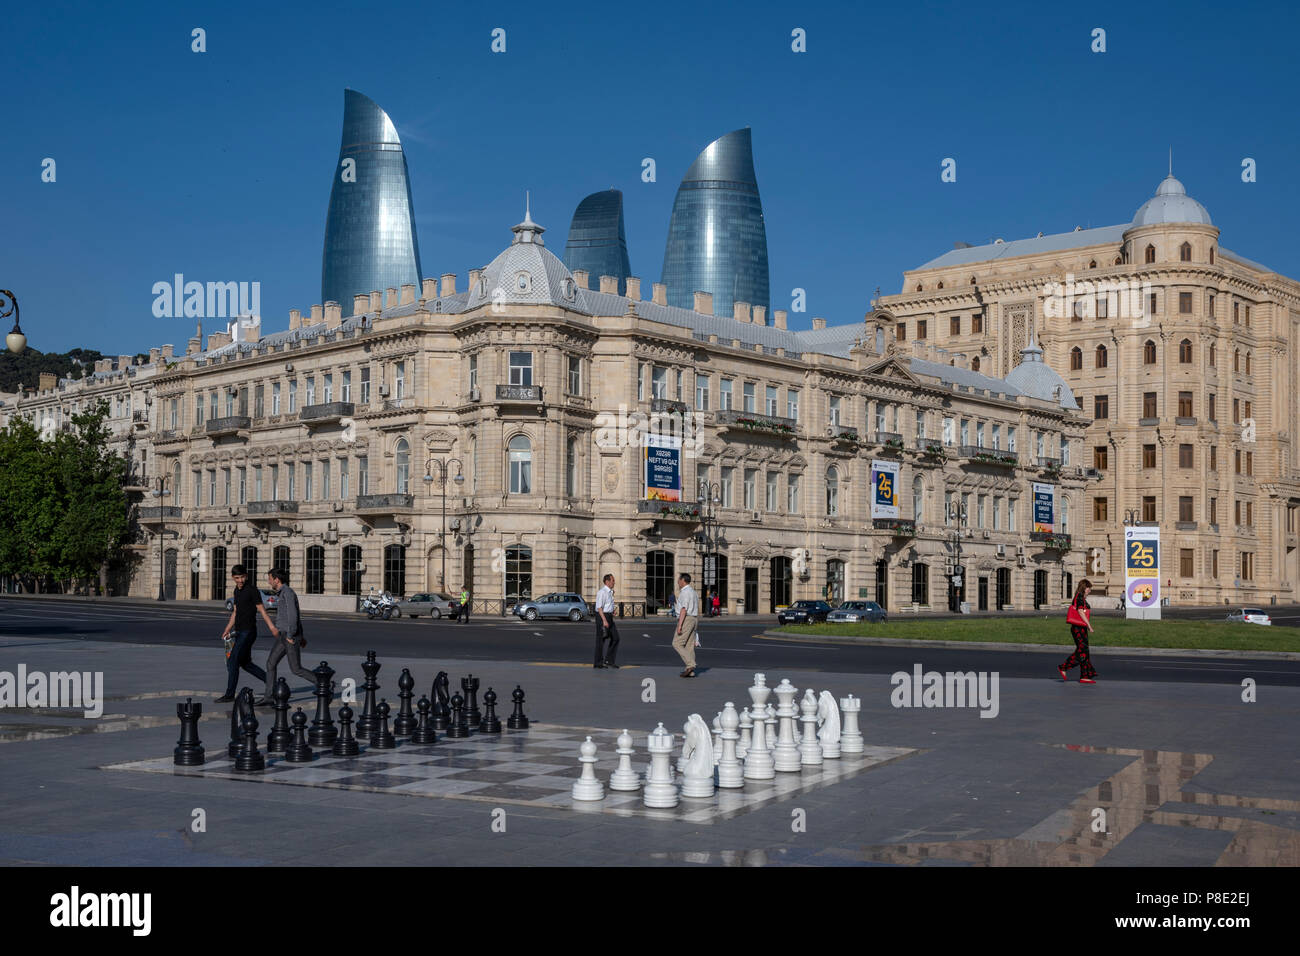 The Azneft square and The Flame Towers in the background  in Baku,Azerbaijan Stock Photo